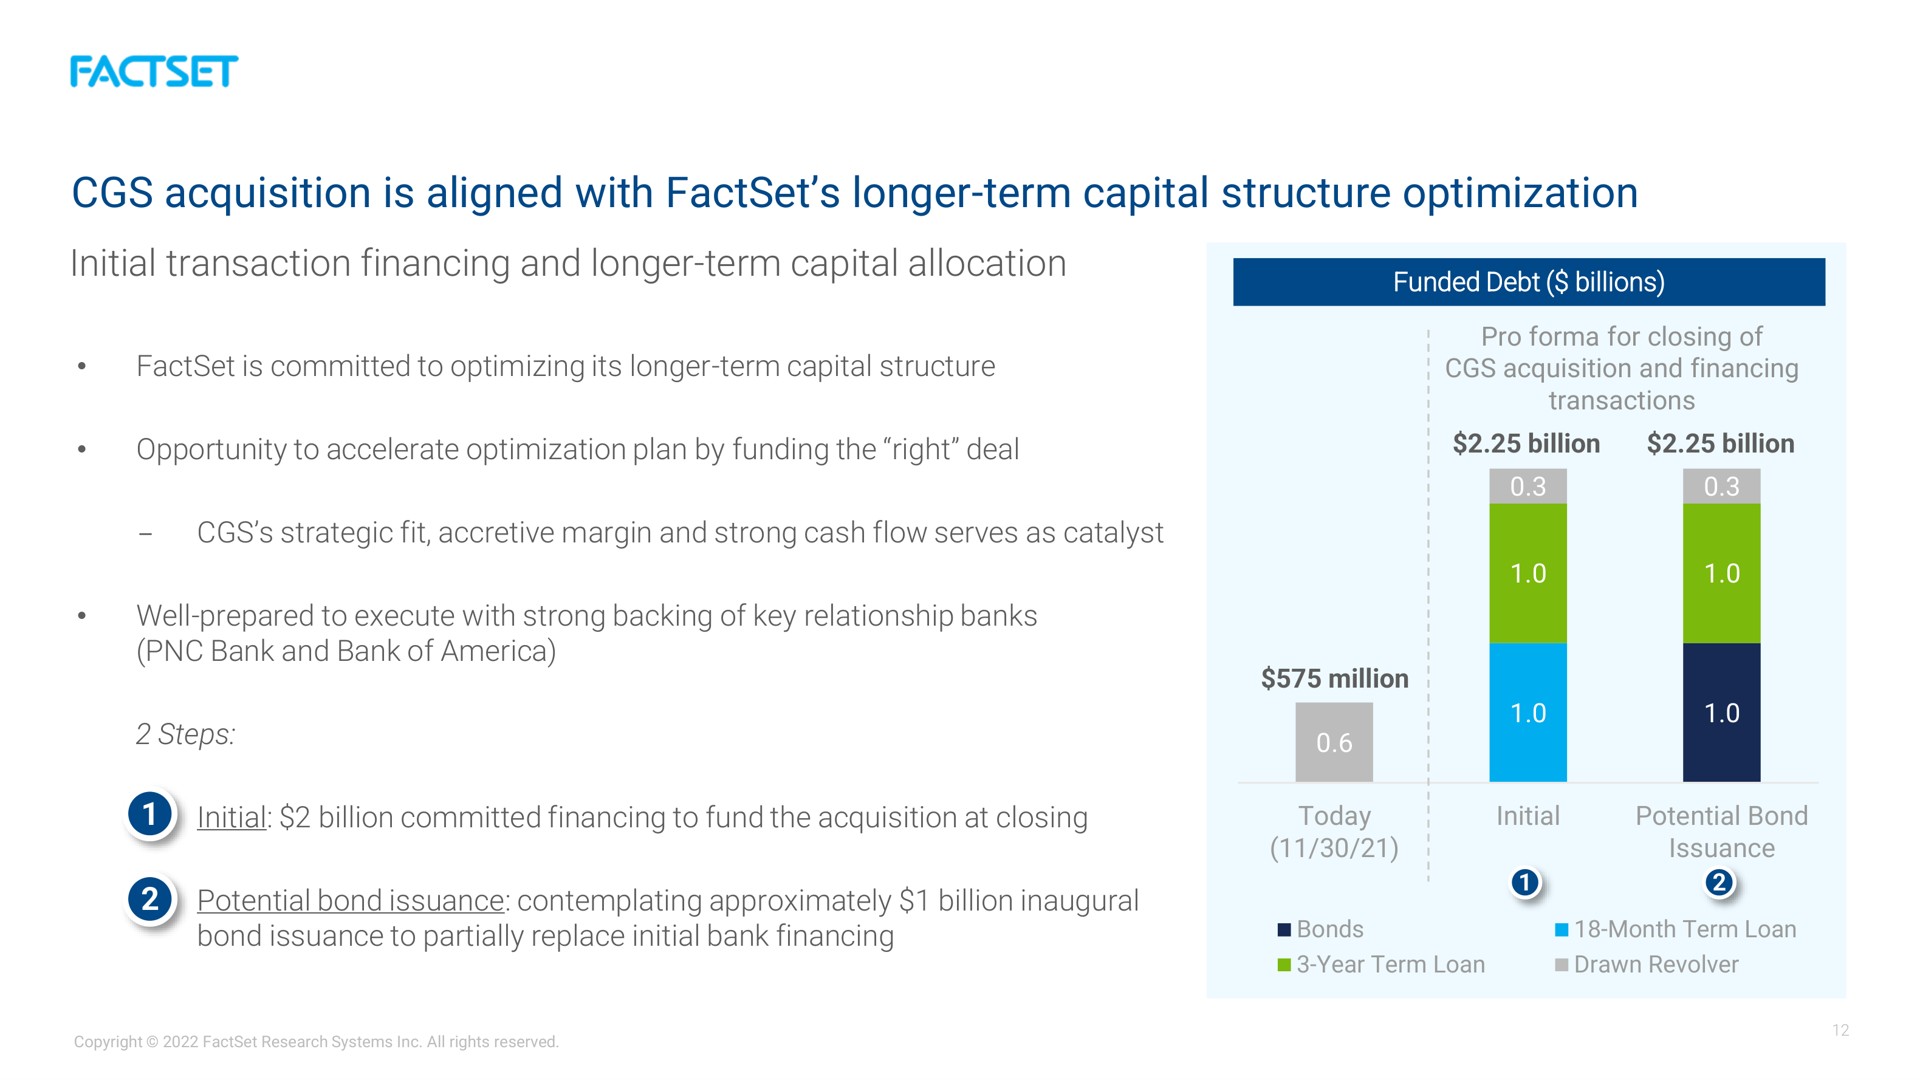 acquisition is aligned with longer term capital structure optimization | Factset